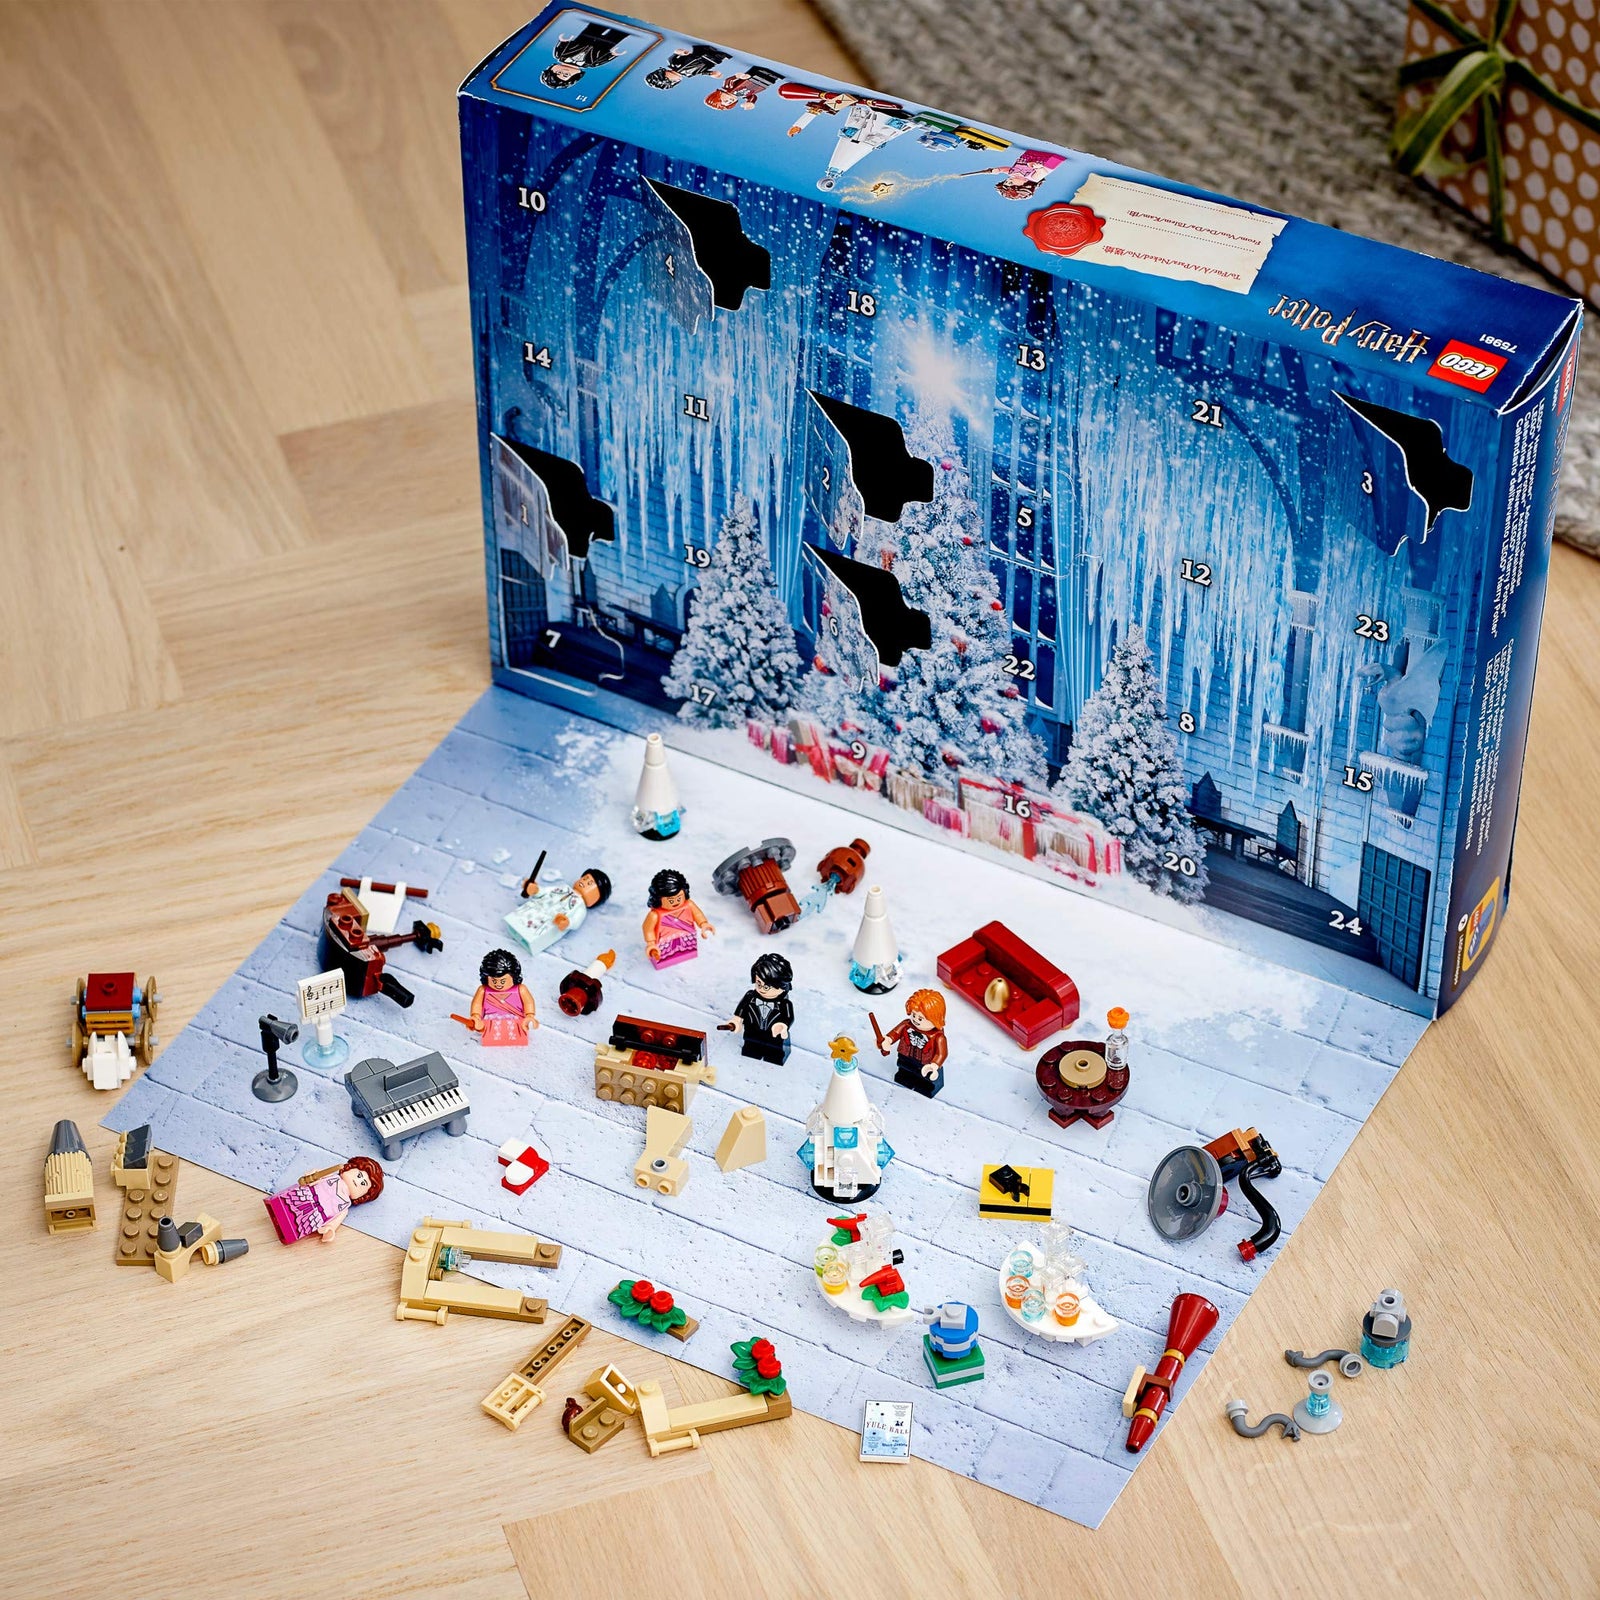 LEGO Harry Potter 2020 Advent Calendar 75981, Collectible Toys from The Hogwarts Yule Ball, Harry Potter and The Goblet of Fire and More, Great Christmas or Birthday Calendar Gift (335 Pieces)